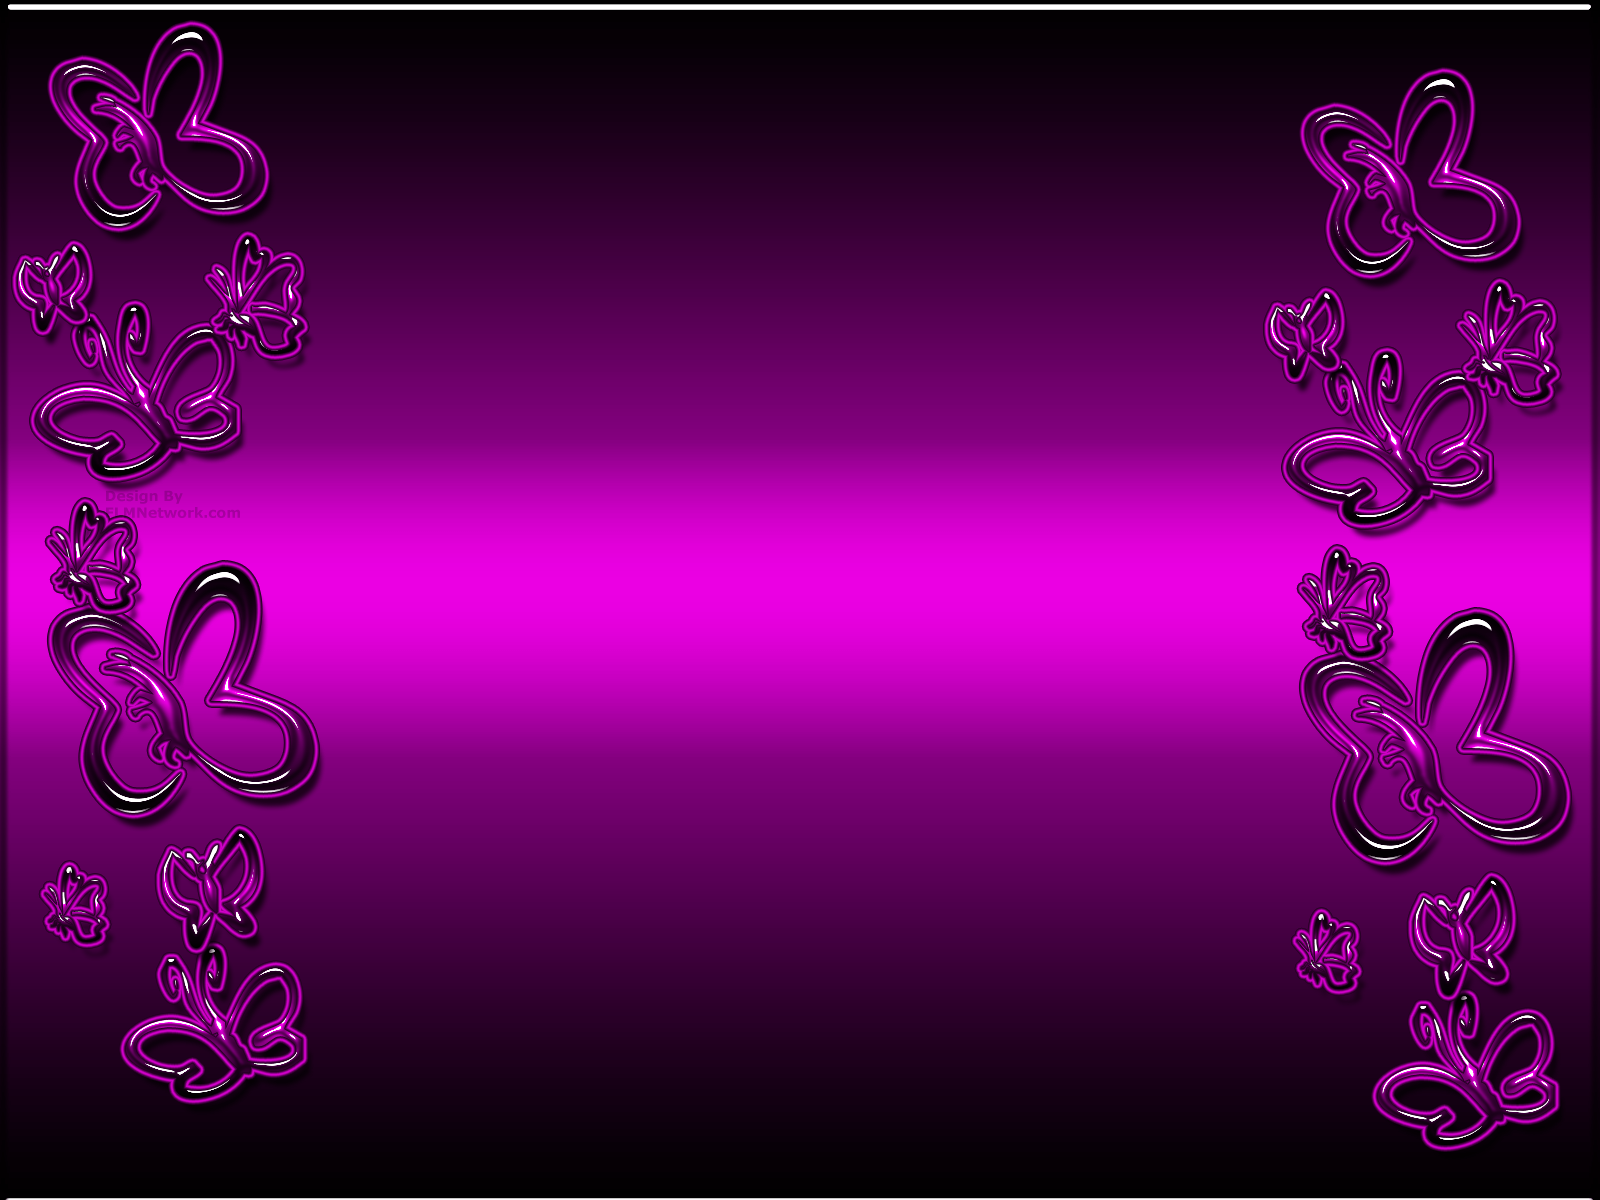 Pink And Purple Background With Butterflies